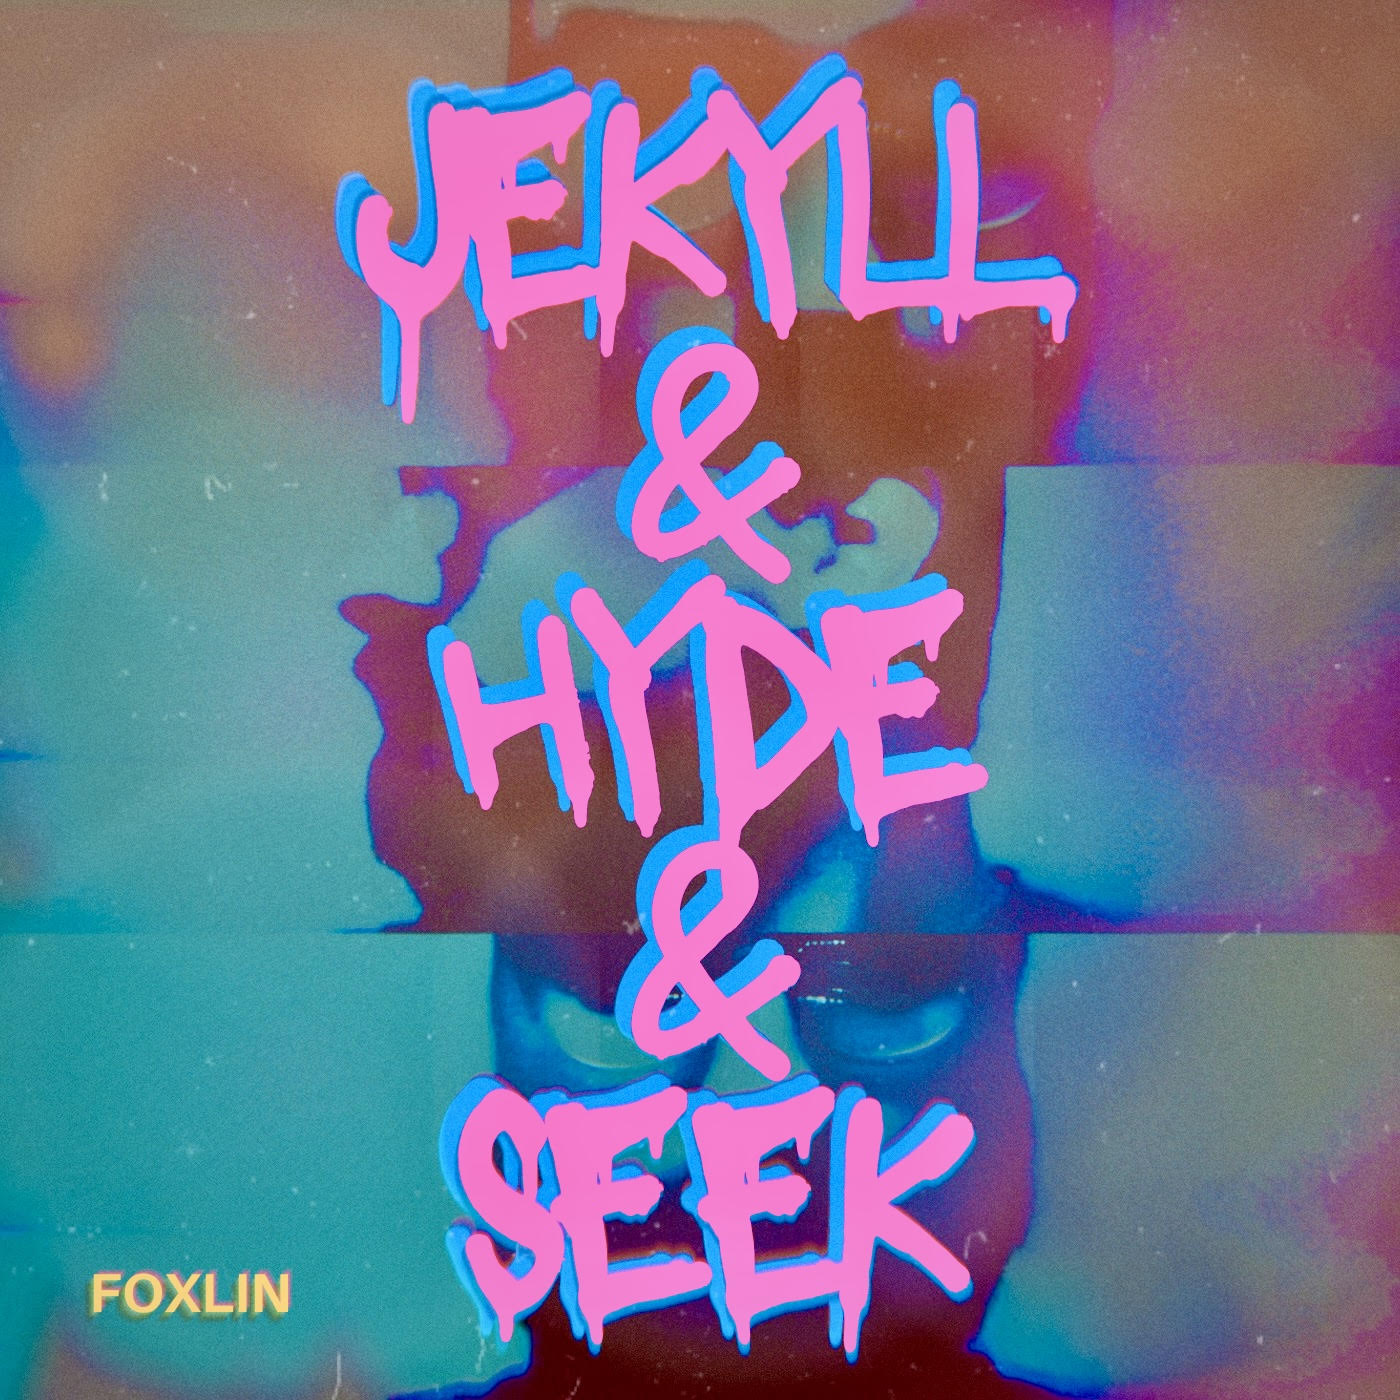 A raw exploration of identity, 'Jekyll&Hyde&Seek' is another captivating EP from Foxlin